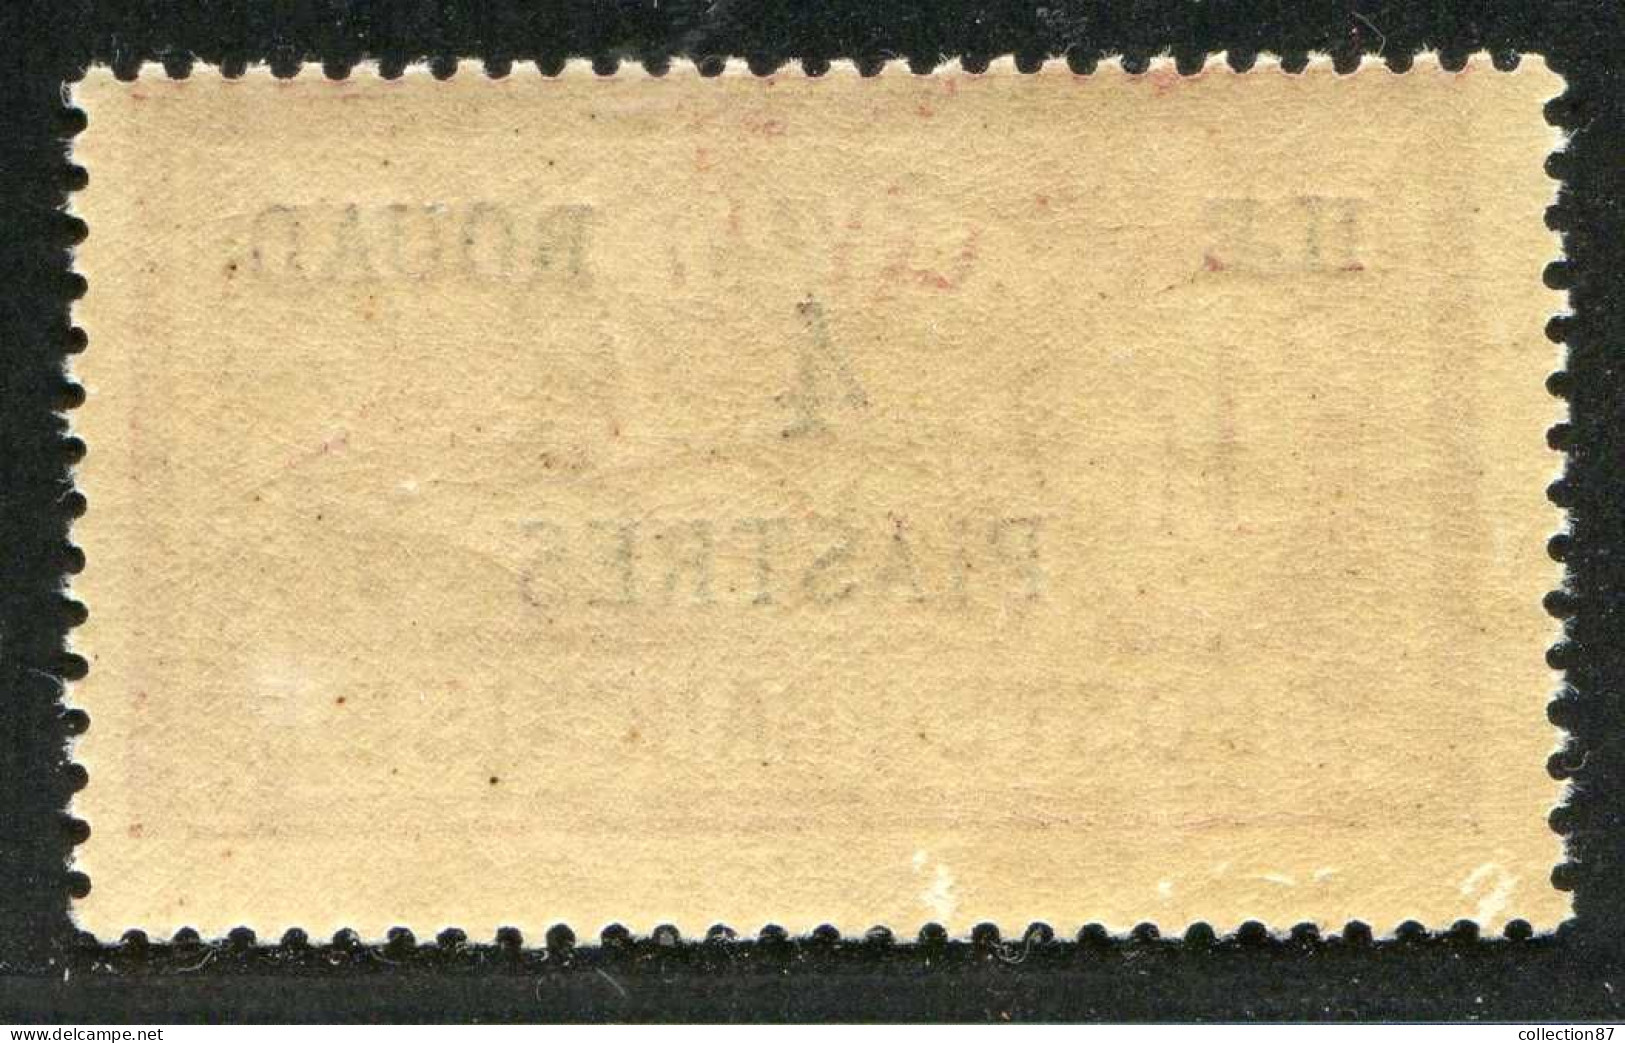 REF 089 > ROUAD < N° 15 * * < Neuf Luxe Dos Visible - MNH * * - Neufs